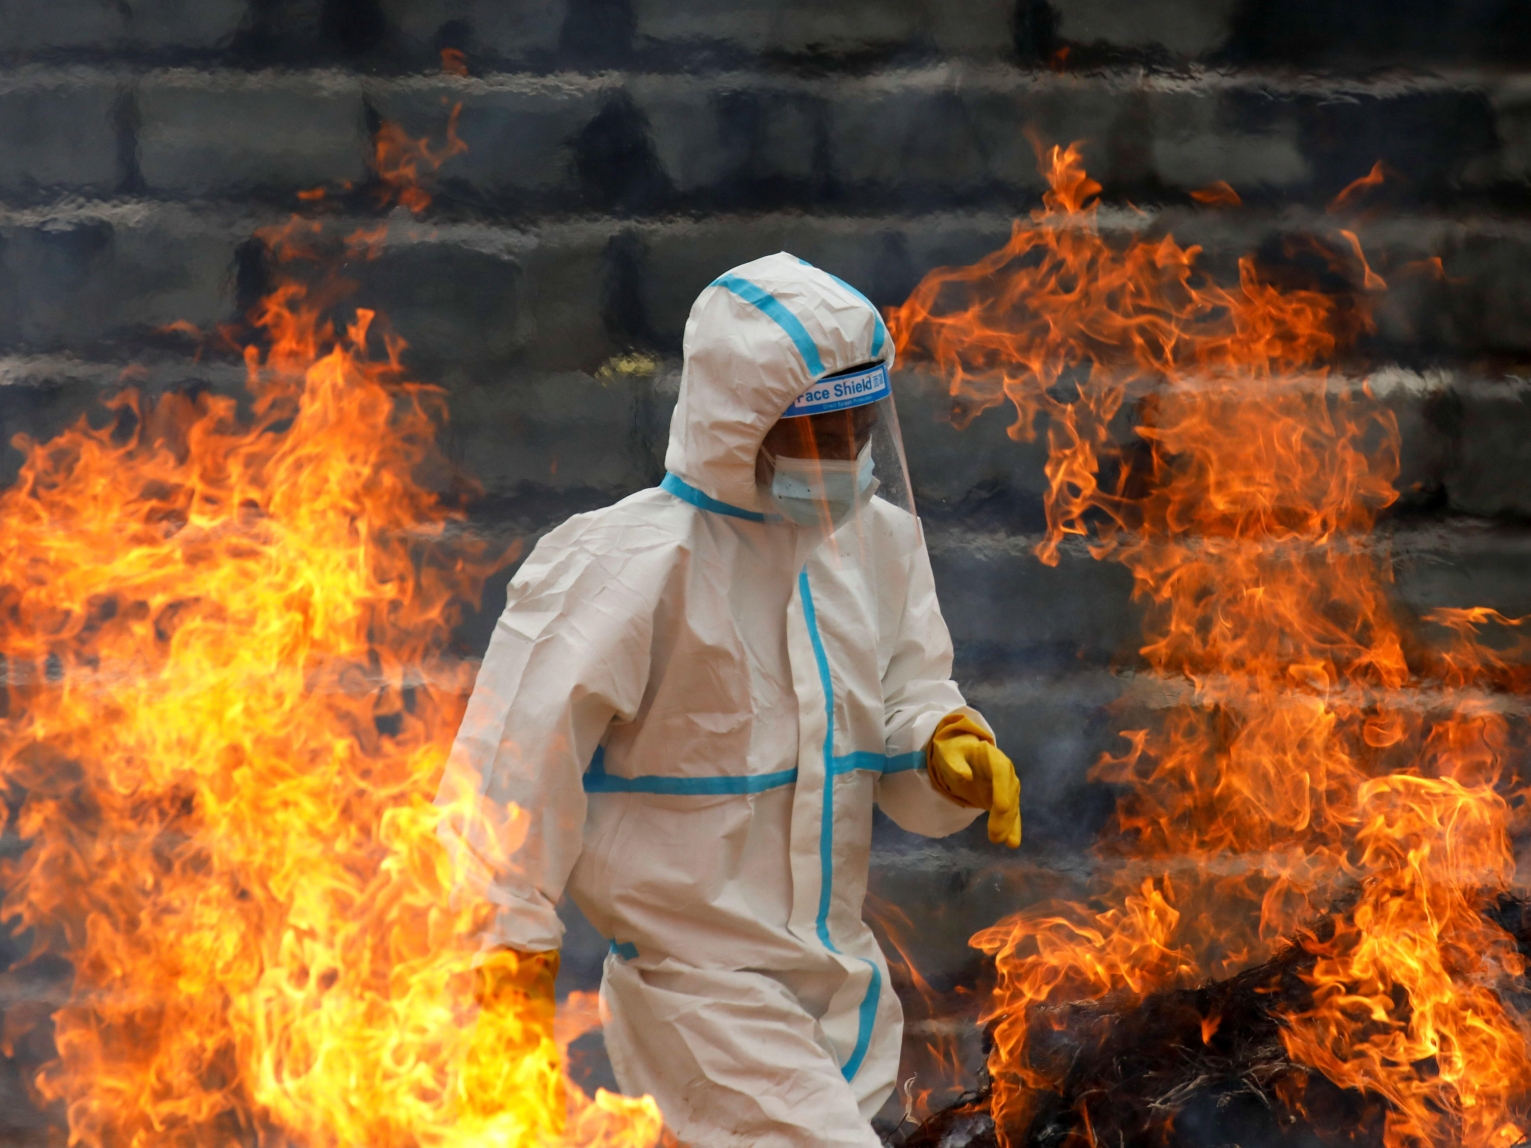 A man wearing personal protective equipment helps cremate the bodies of COVID-19 victims.